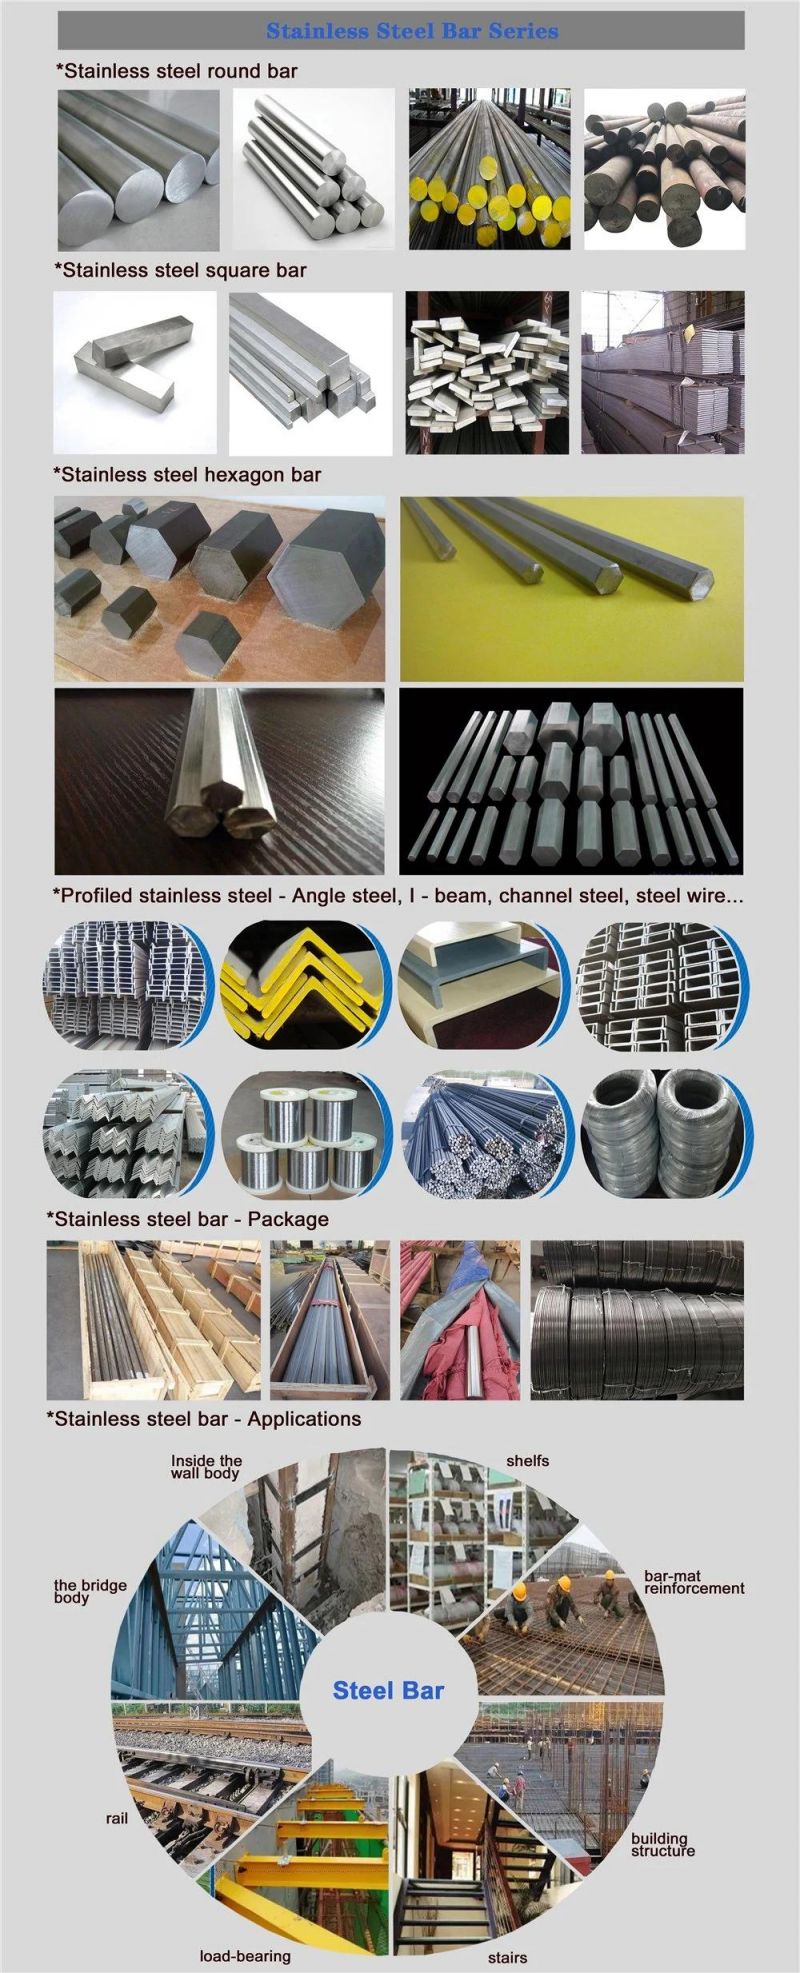 Factory Price Wholesale Compare Steel Rebar, Deformed Steel Bar, Iron Rods for Construction/Concrete/Building